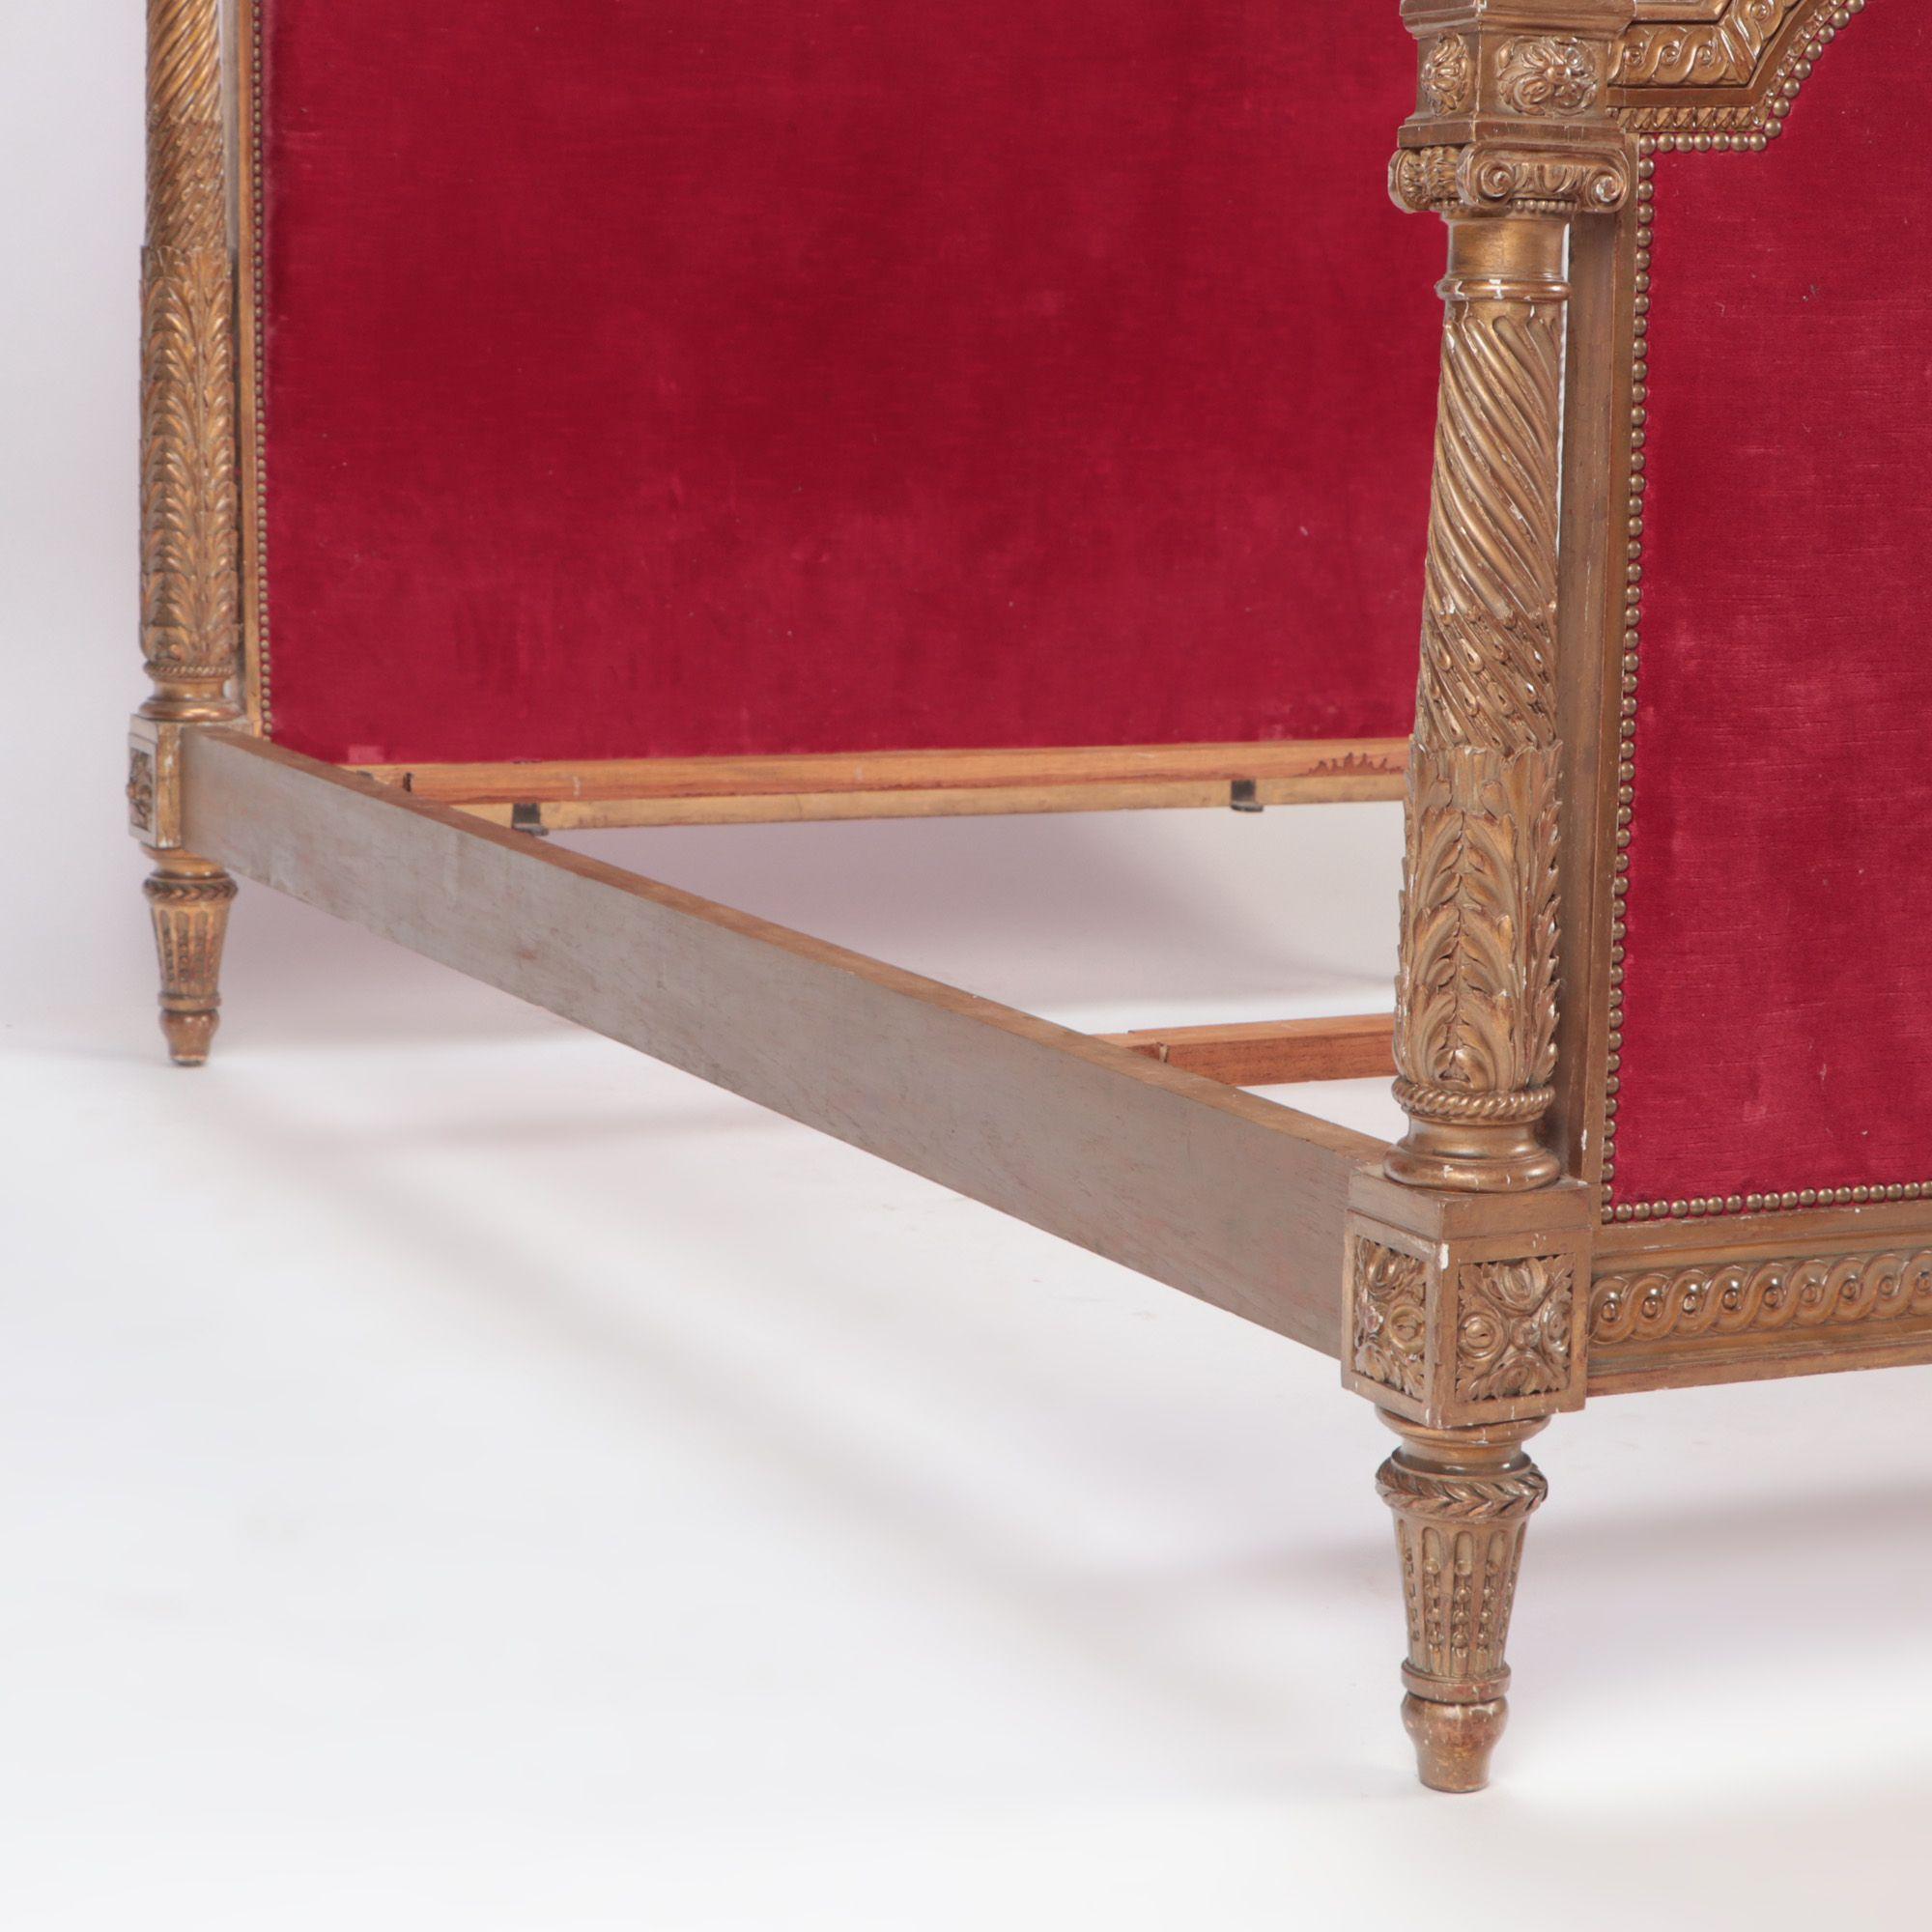 A French giltwood Louis XVI style full size bed C 1900.
Interior Dimensions : 52.5' W x 81.25